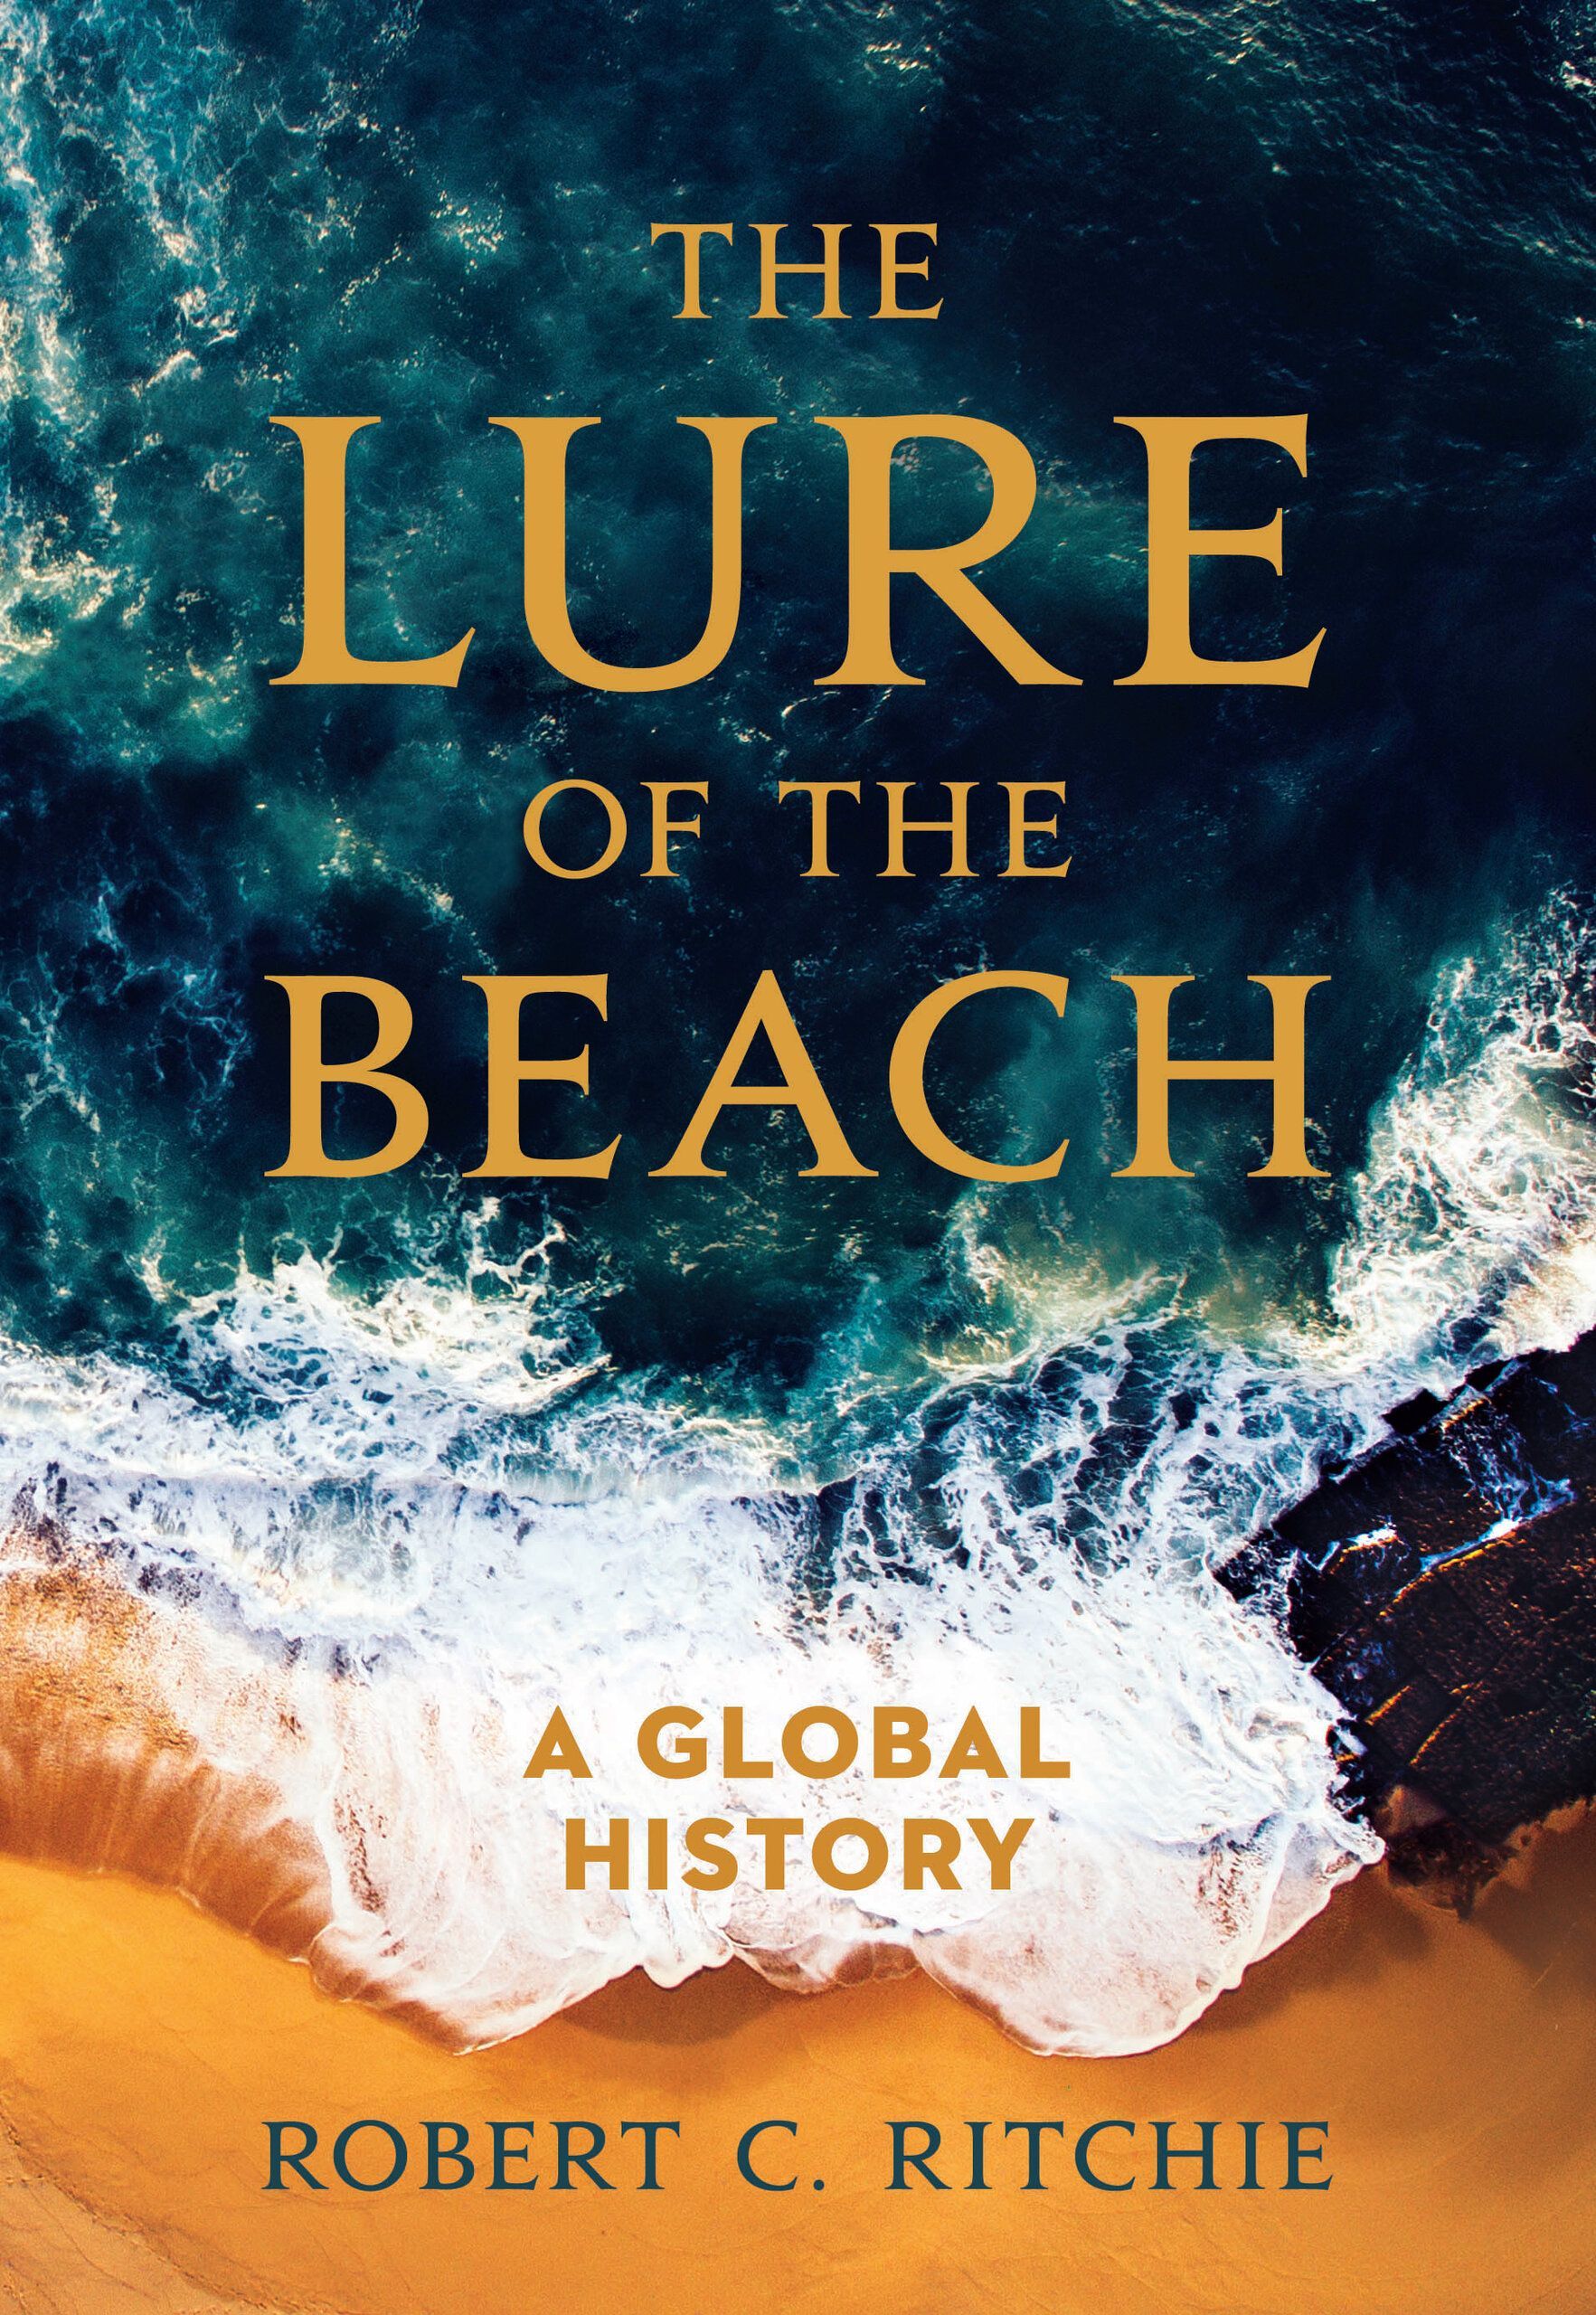 Going Coastal: On Some Recent Books About the Ecology and History of Beaches